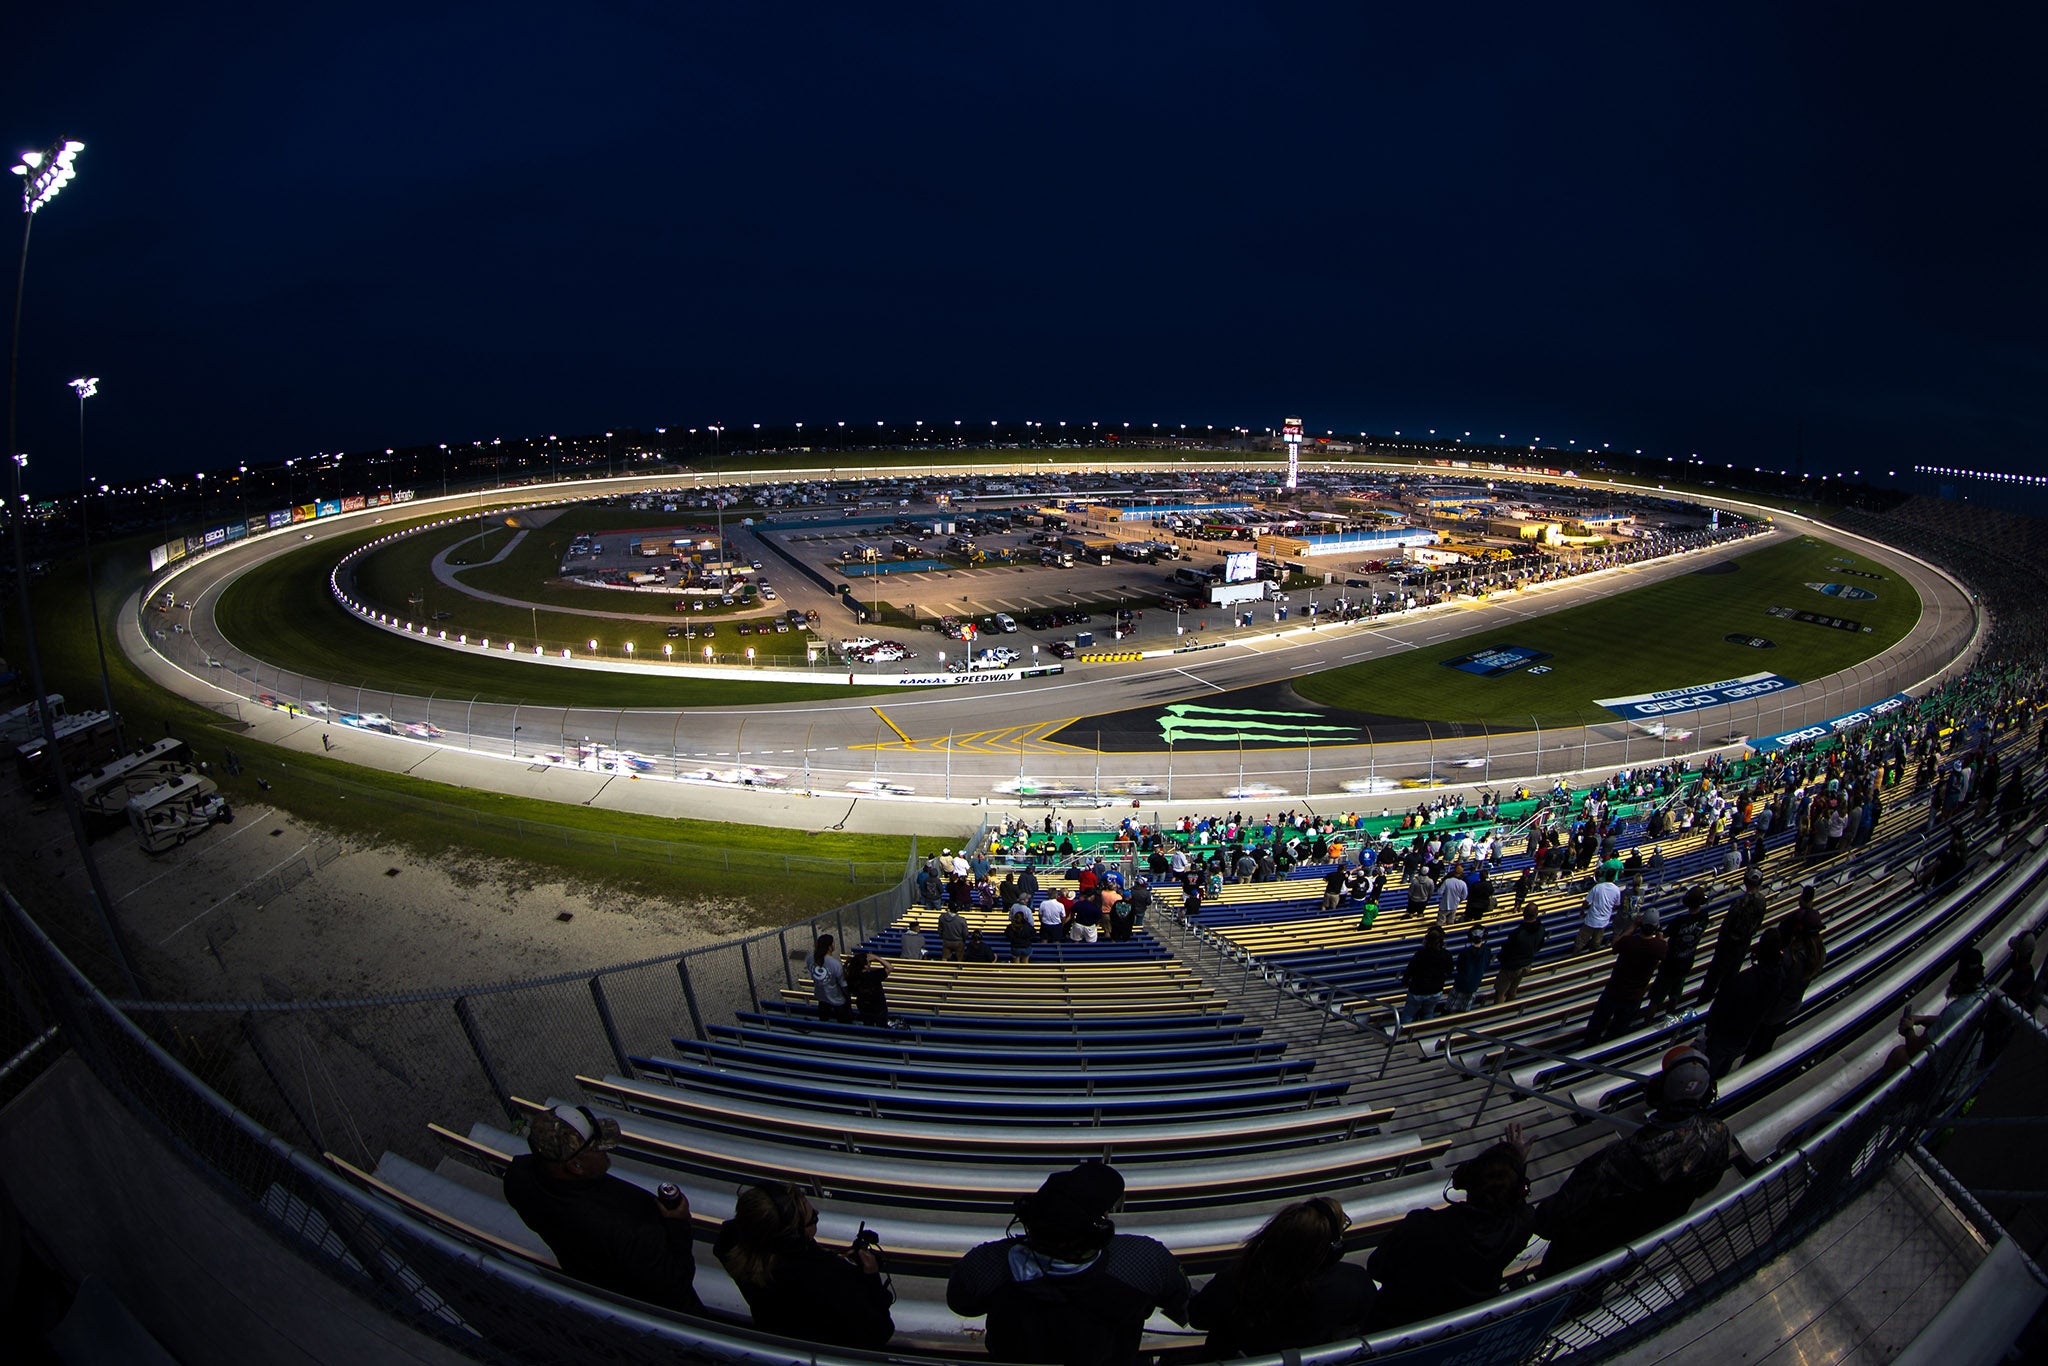 <p class="caption-title">NASCAR Camping World Truck Series - Wise Power 200</p>, Night falls over the Kansas Speedway during the Wise Power 200 on May 1st, 2021 at the Kansas Speedway in Kansas City, Kansas., <i>William Purnell/Icon Sportswire via Getty Images</i>